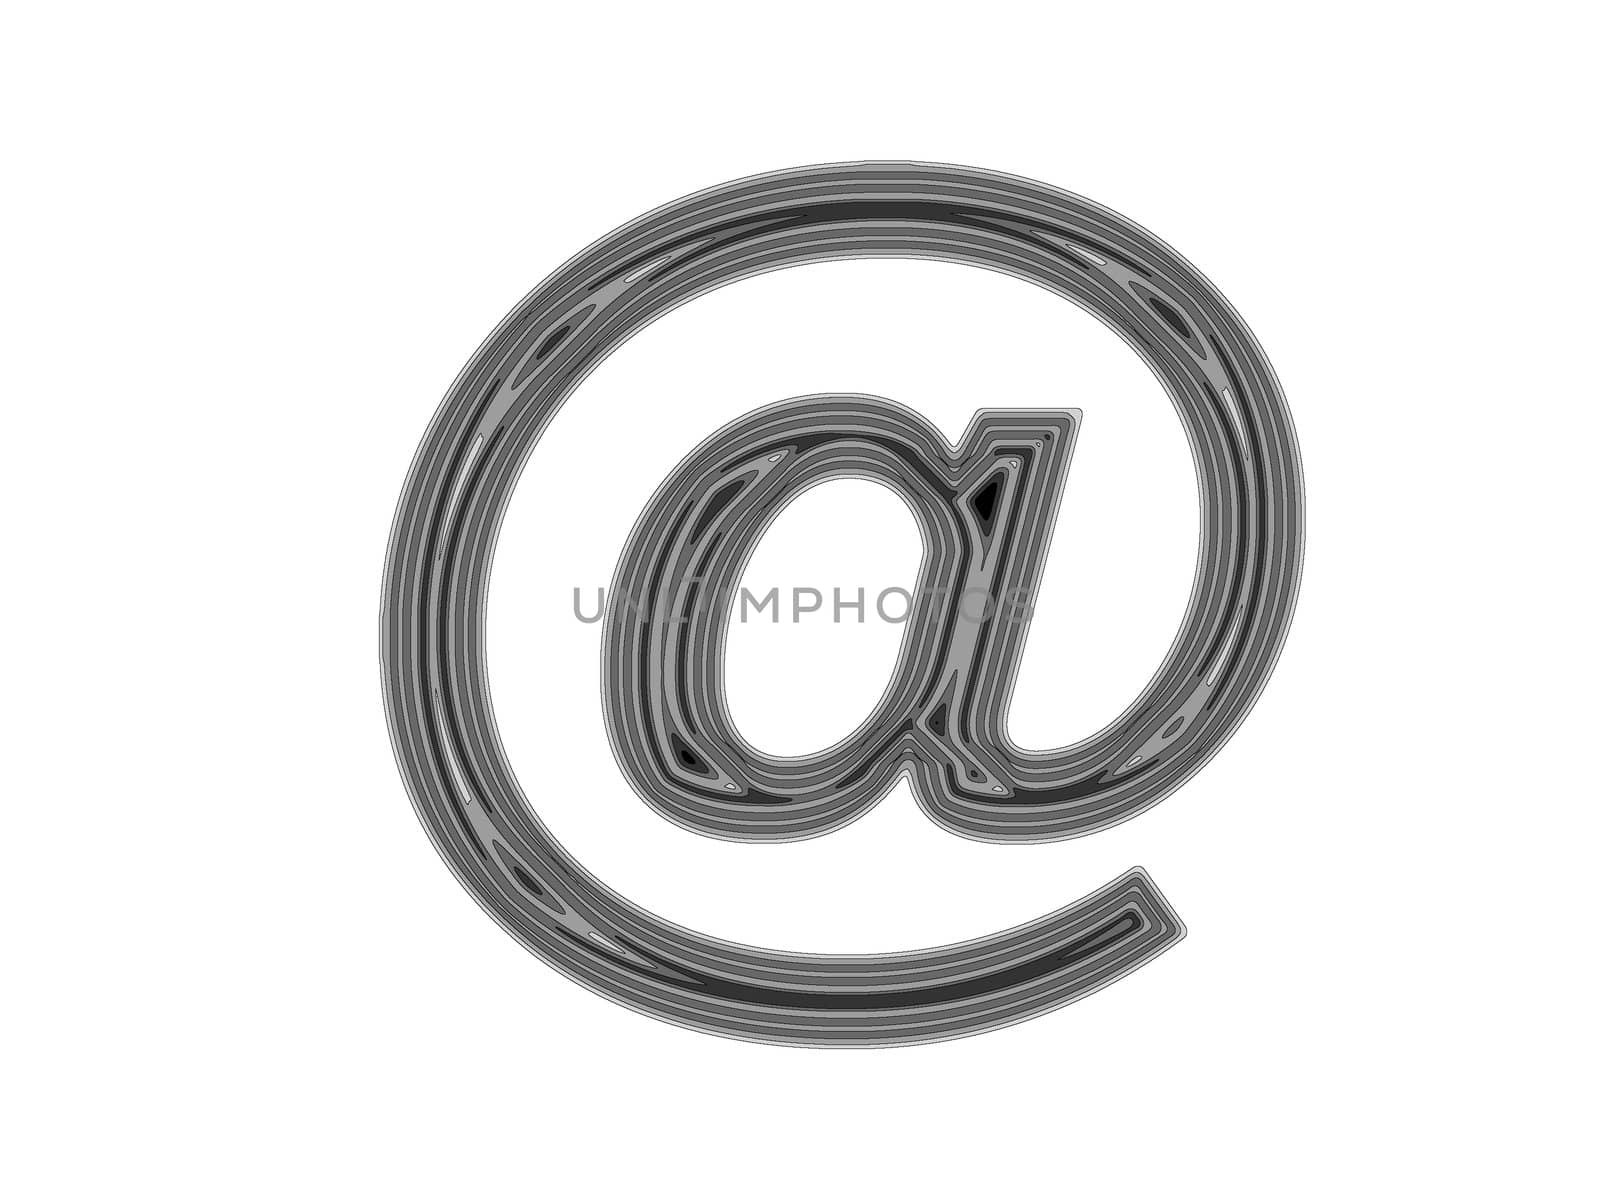 Filled mail symbol by tomatto